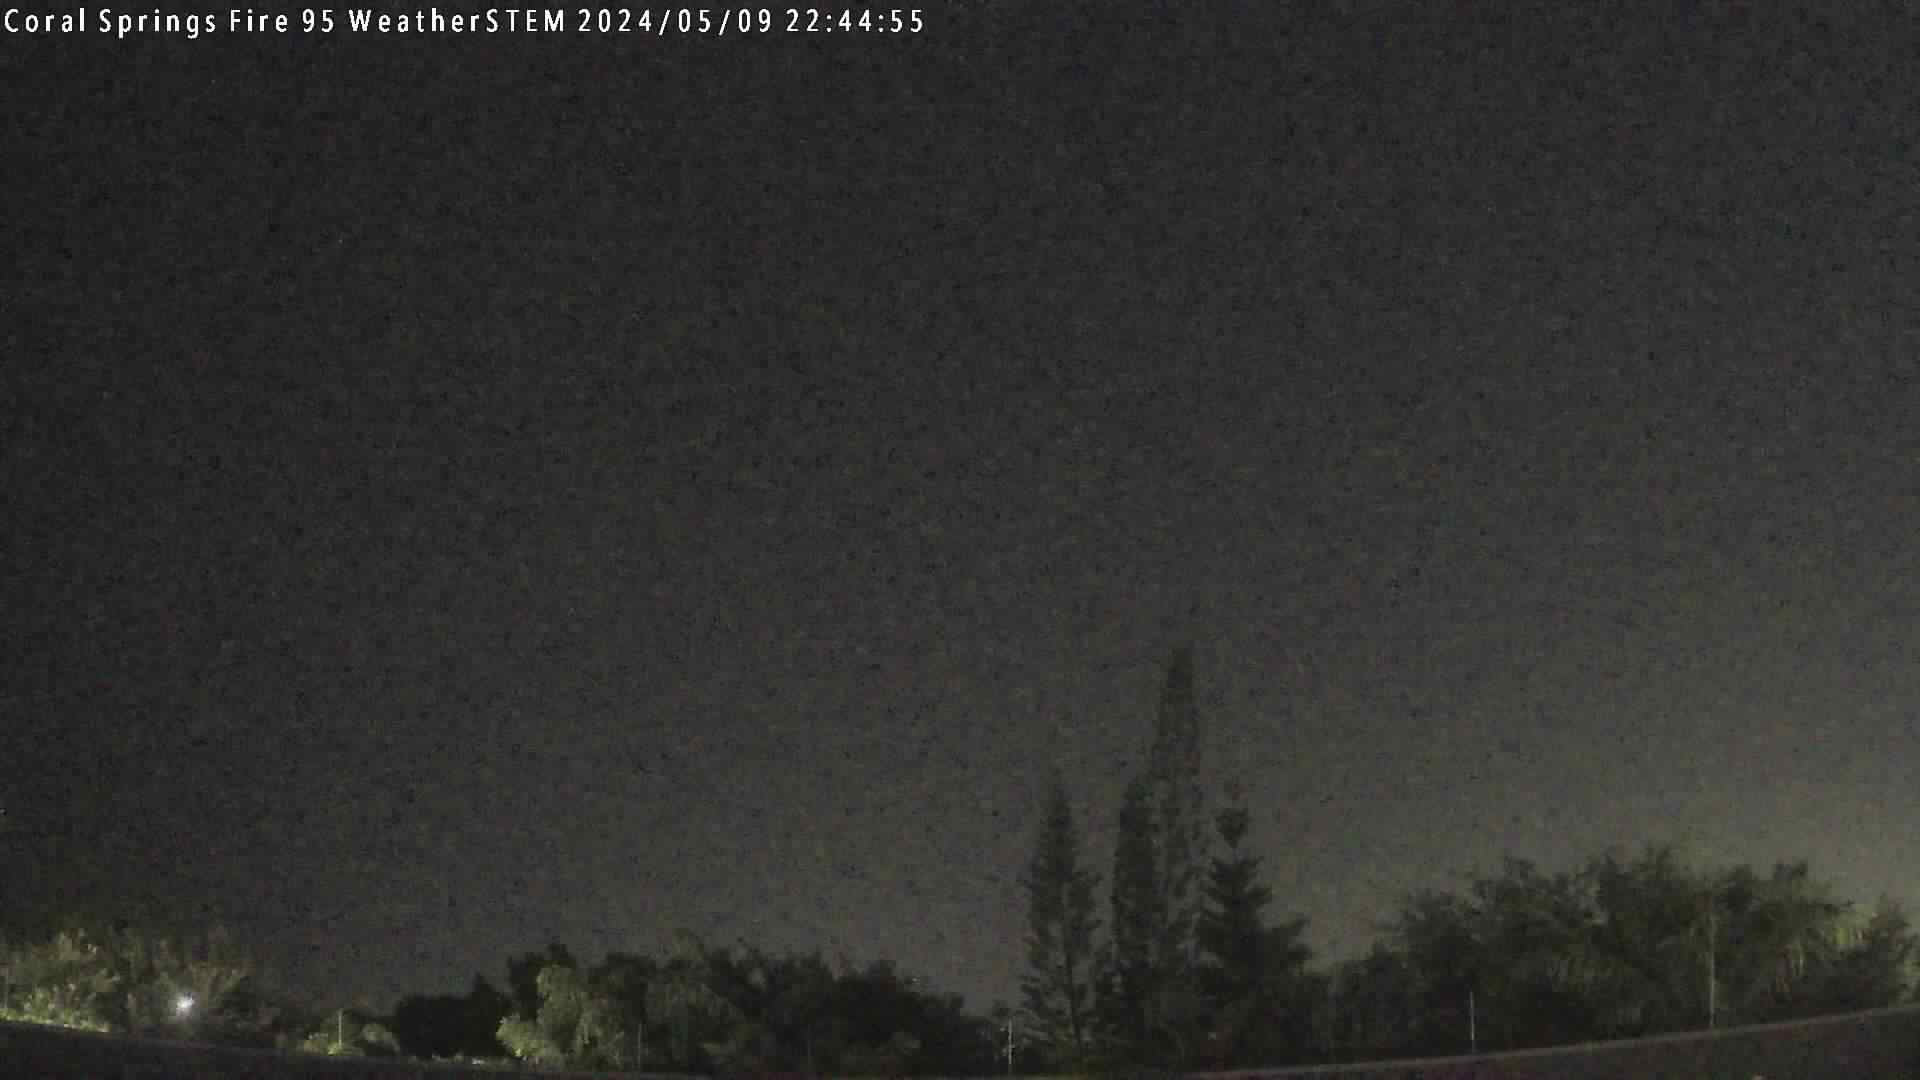  WeatherSTEM Cloud Camera CSFire95WxSTEM in Broward County, Florida FL at Coral Springs FD Fire Station 95